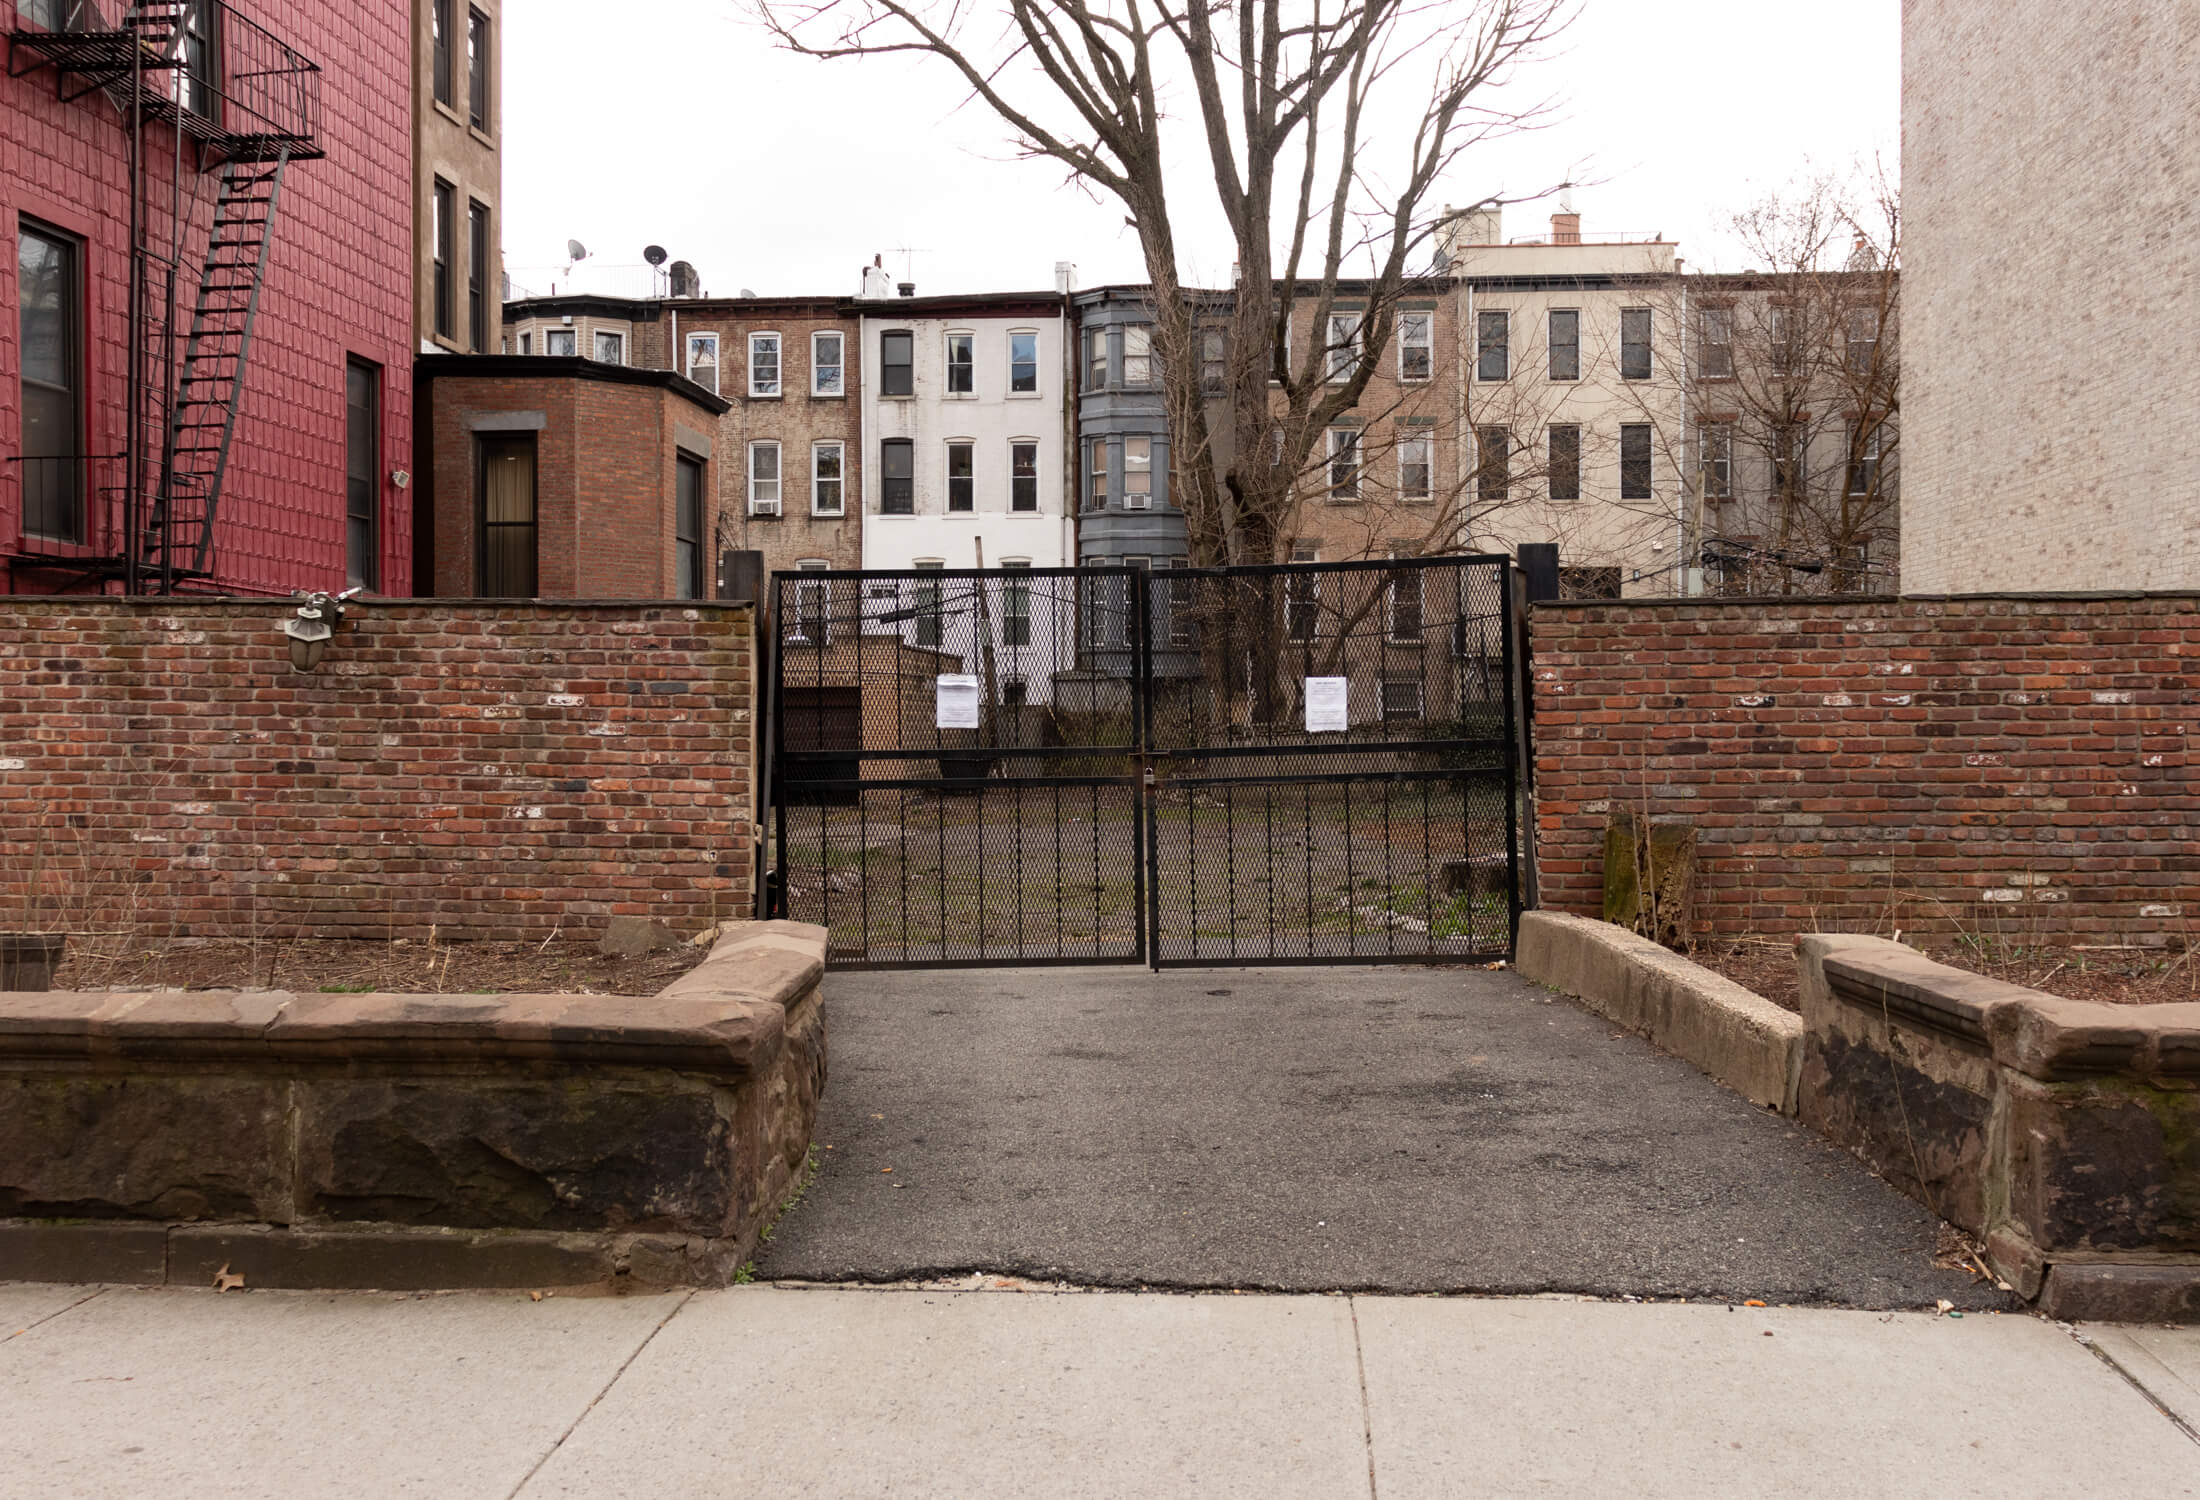 gates in front of the vacant lot